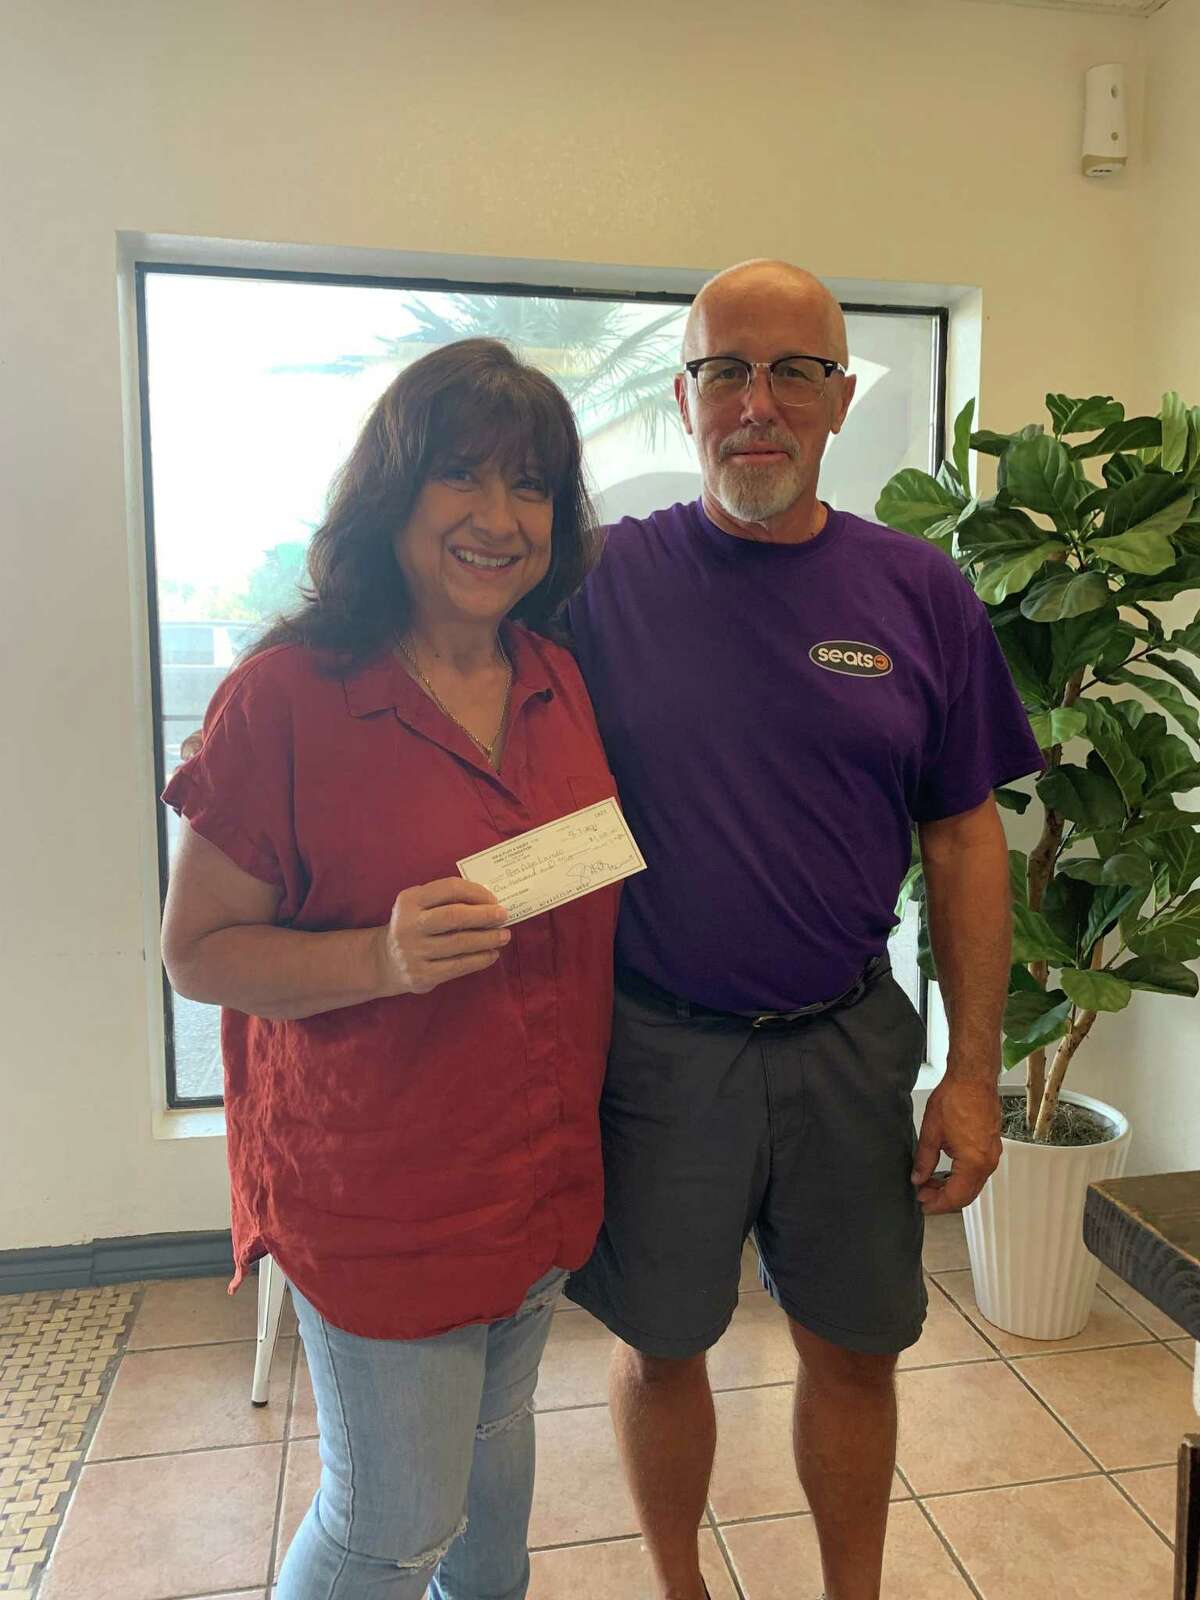 Jim Heuer, of Seats, Inc., presents a check for $1,000 to Mary Bender, of Pets Alive Laredo (PAL), on behalf of the W.R. & Floy A. Sauey Family Foundation.